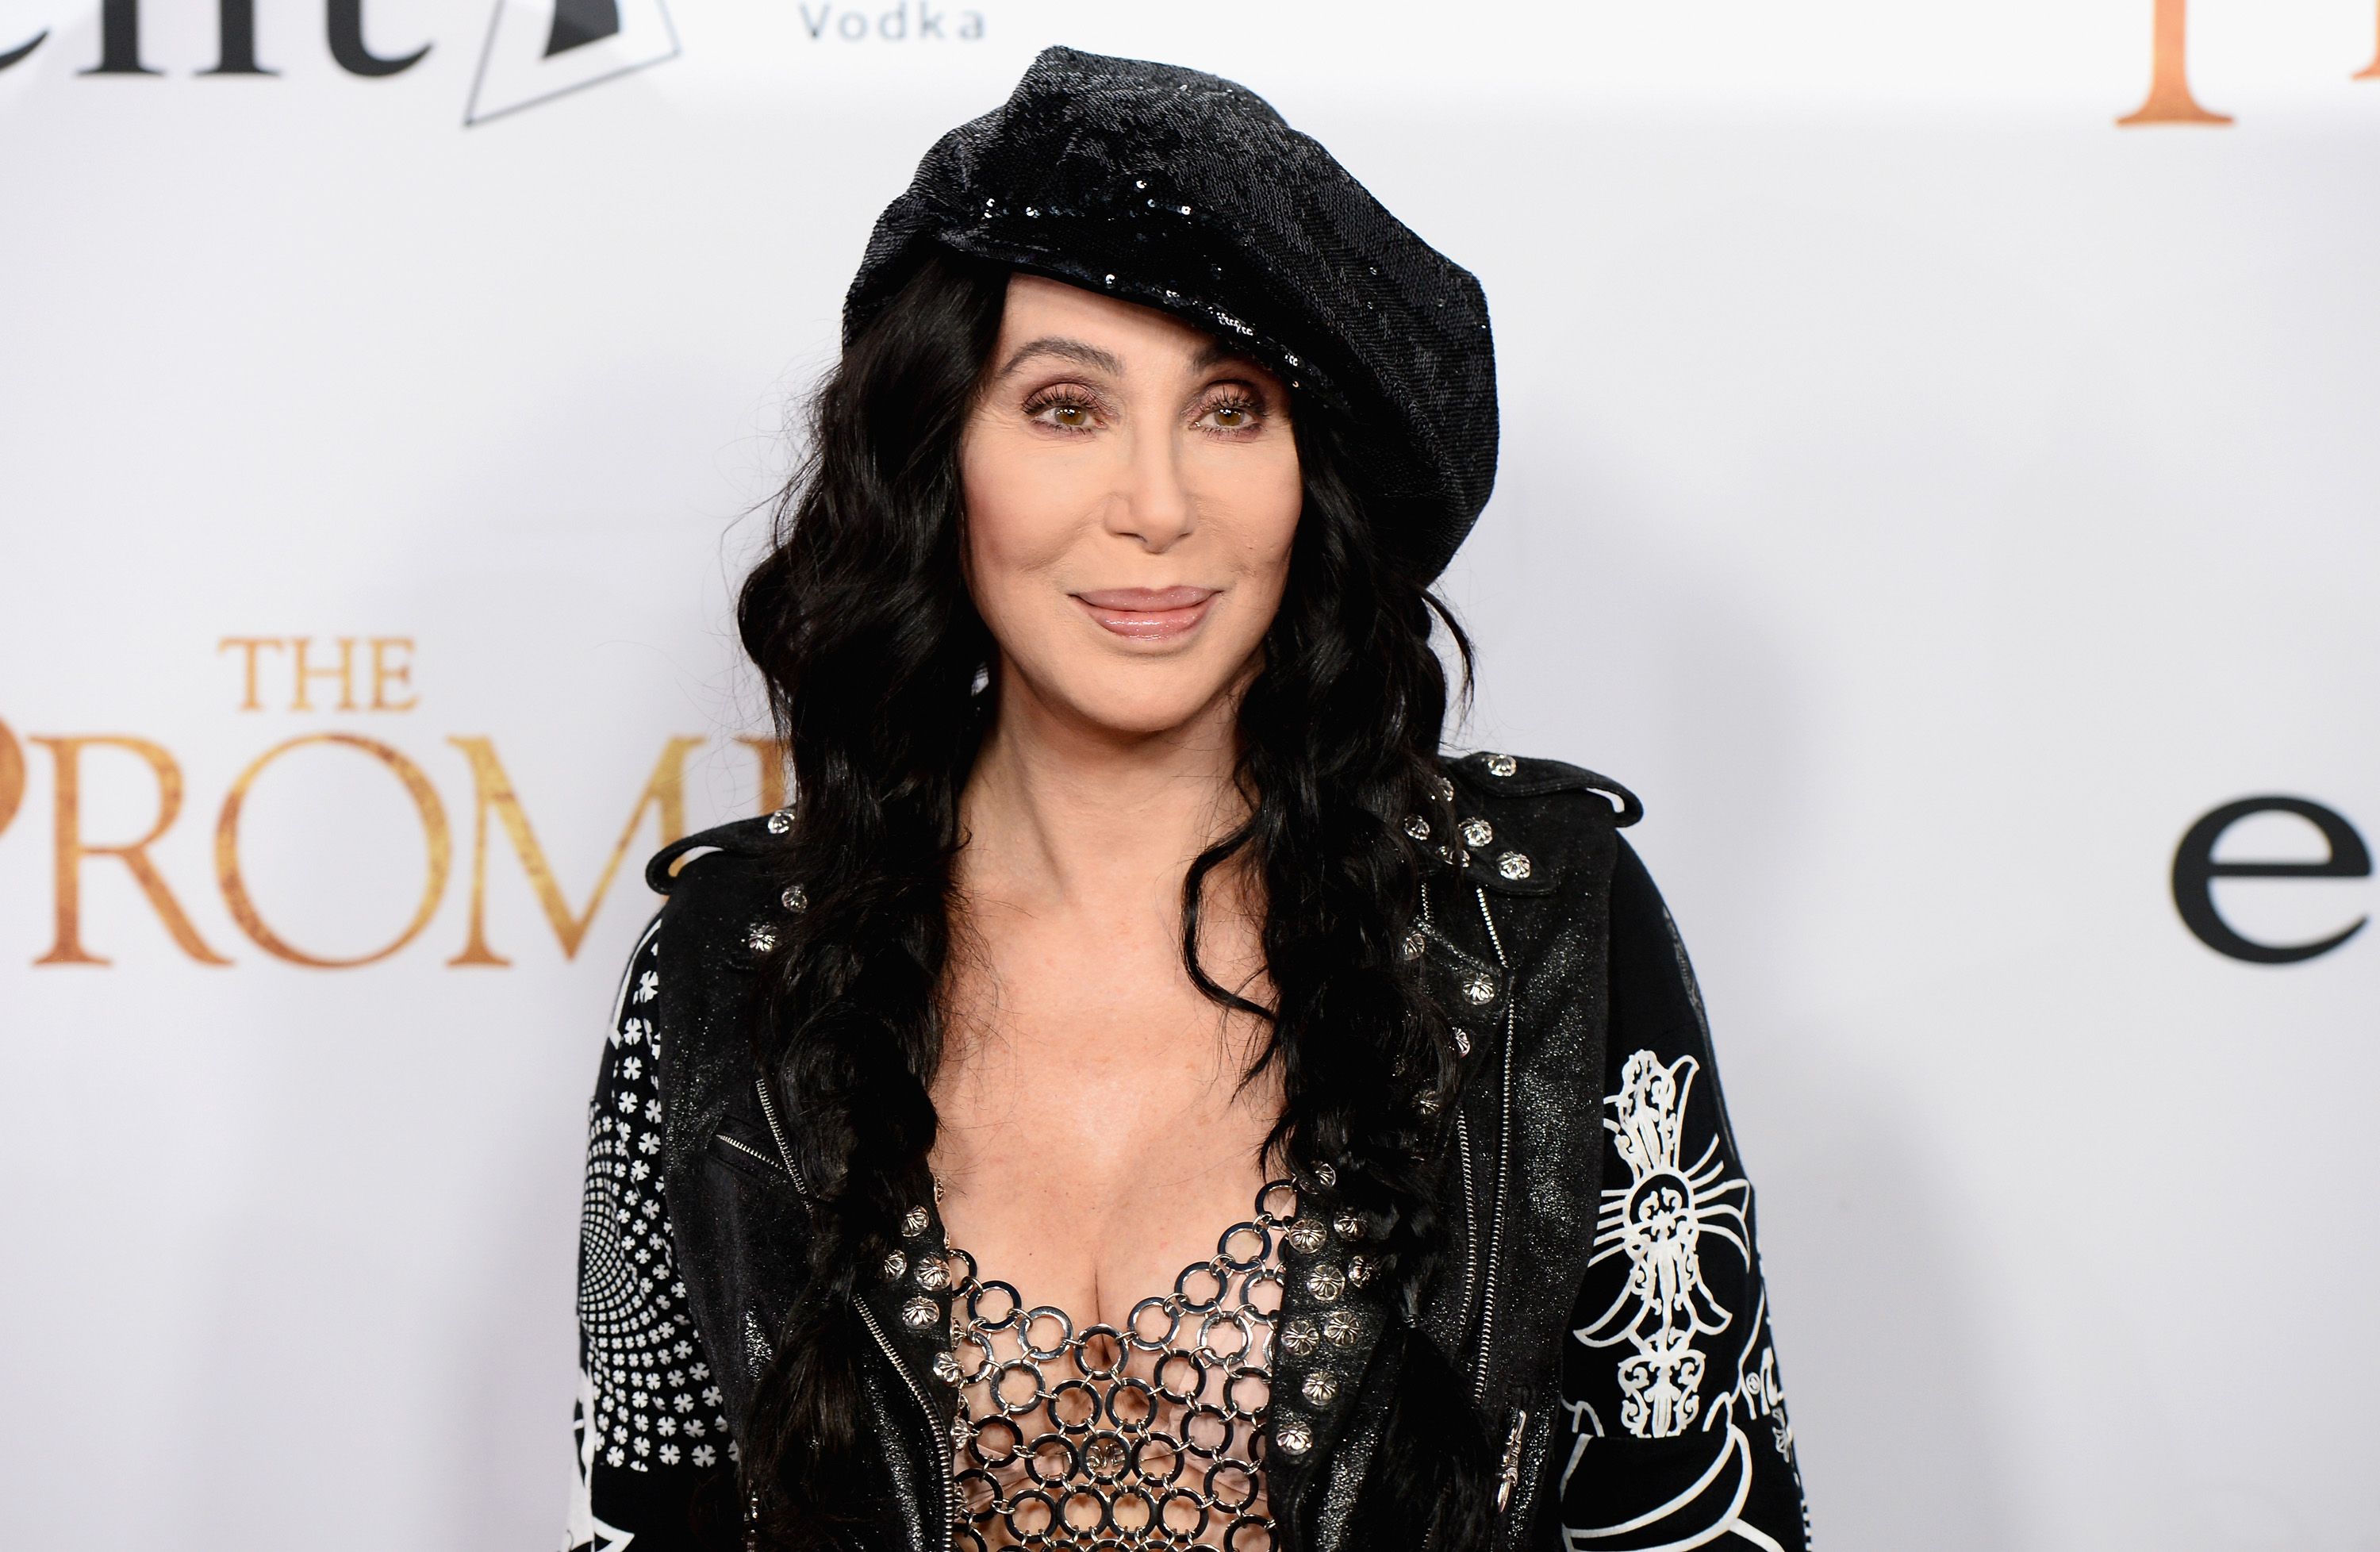 Cher at the Los Angeles premiere of 'The Promise' at TCL Chinese Theatre on April 12, 2017 | Photo: Getty Images